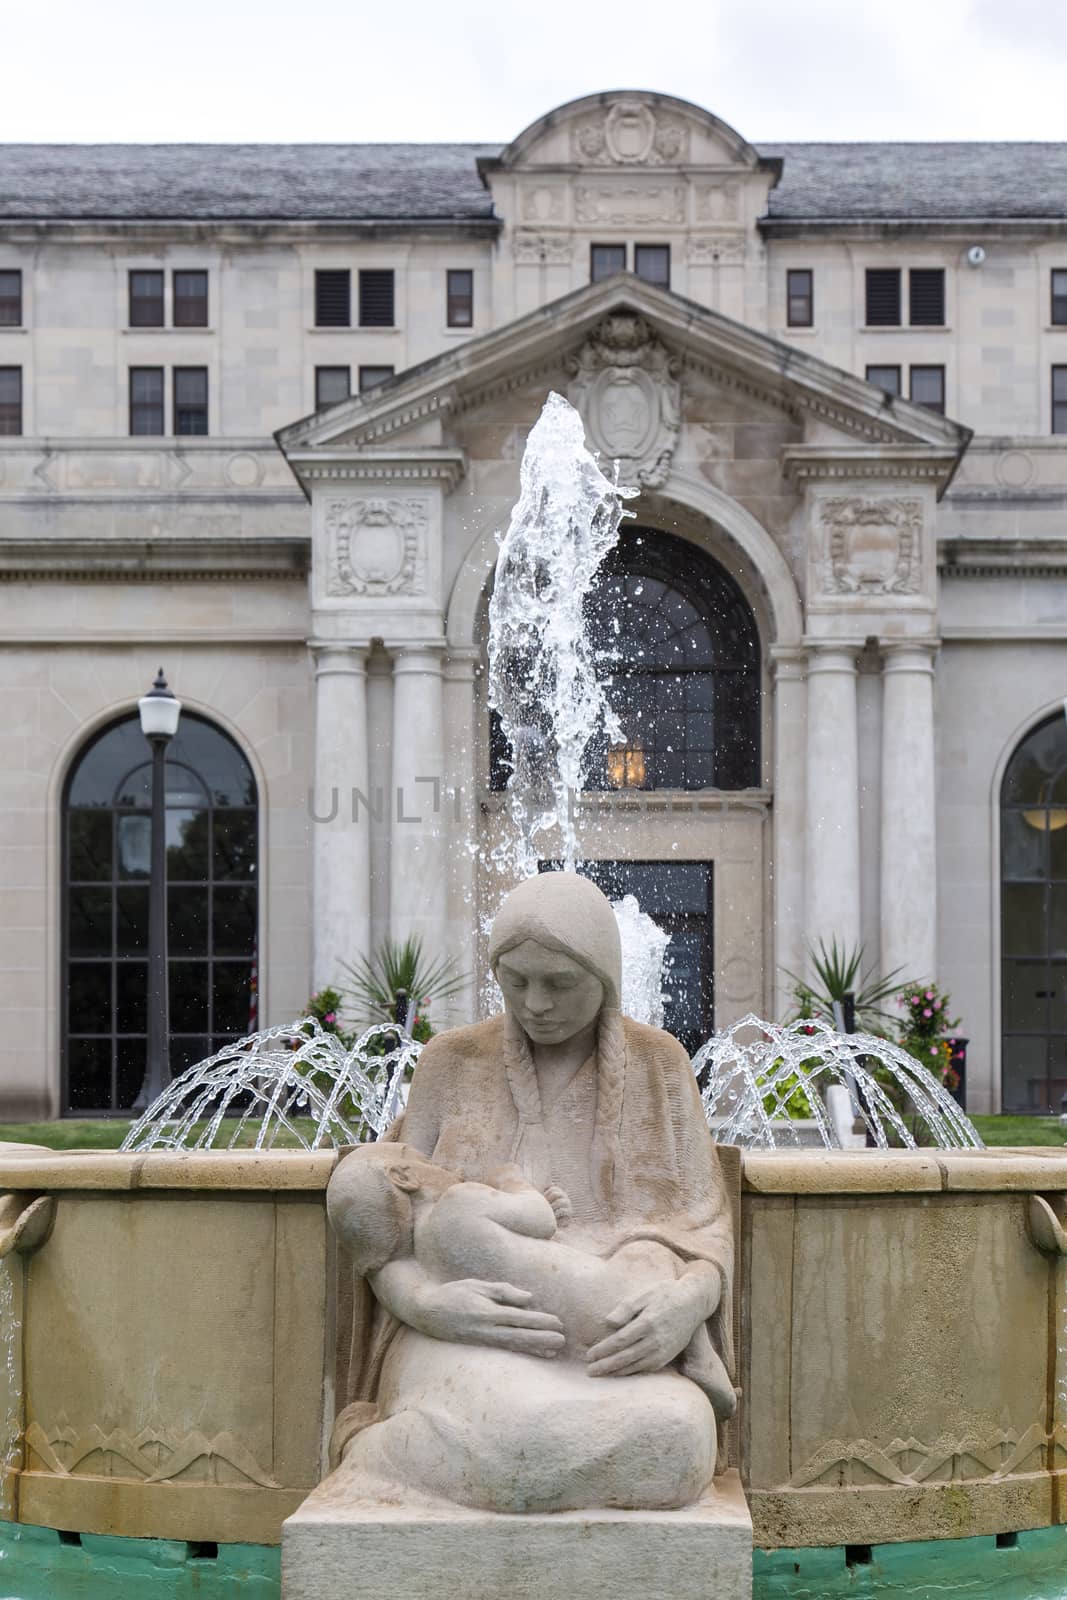 AUGUST 6, 2015: Fountains of the Four Seasons on the campus of the University of Iowa State